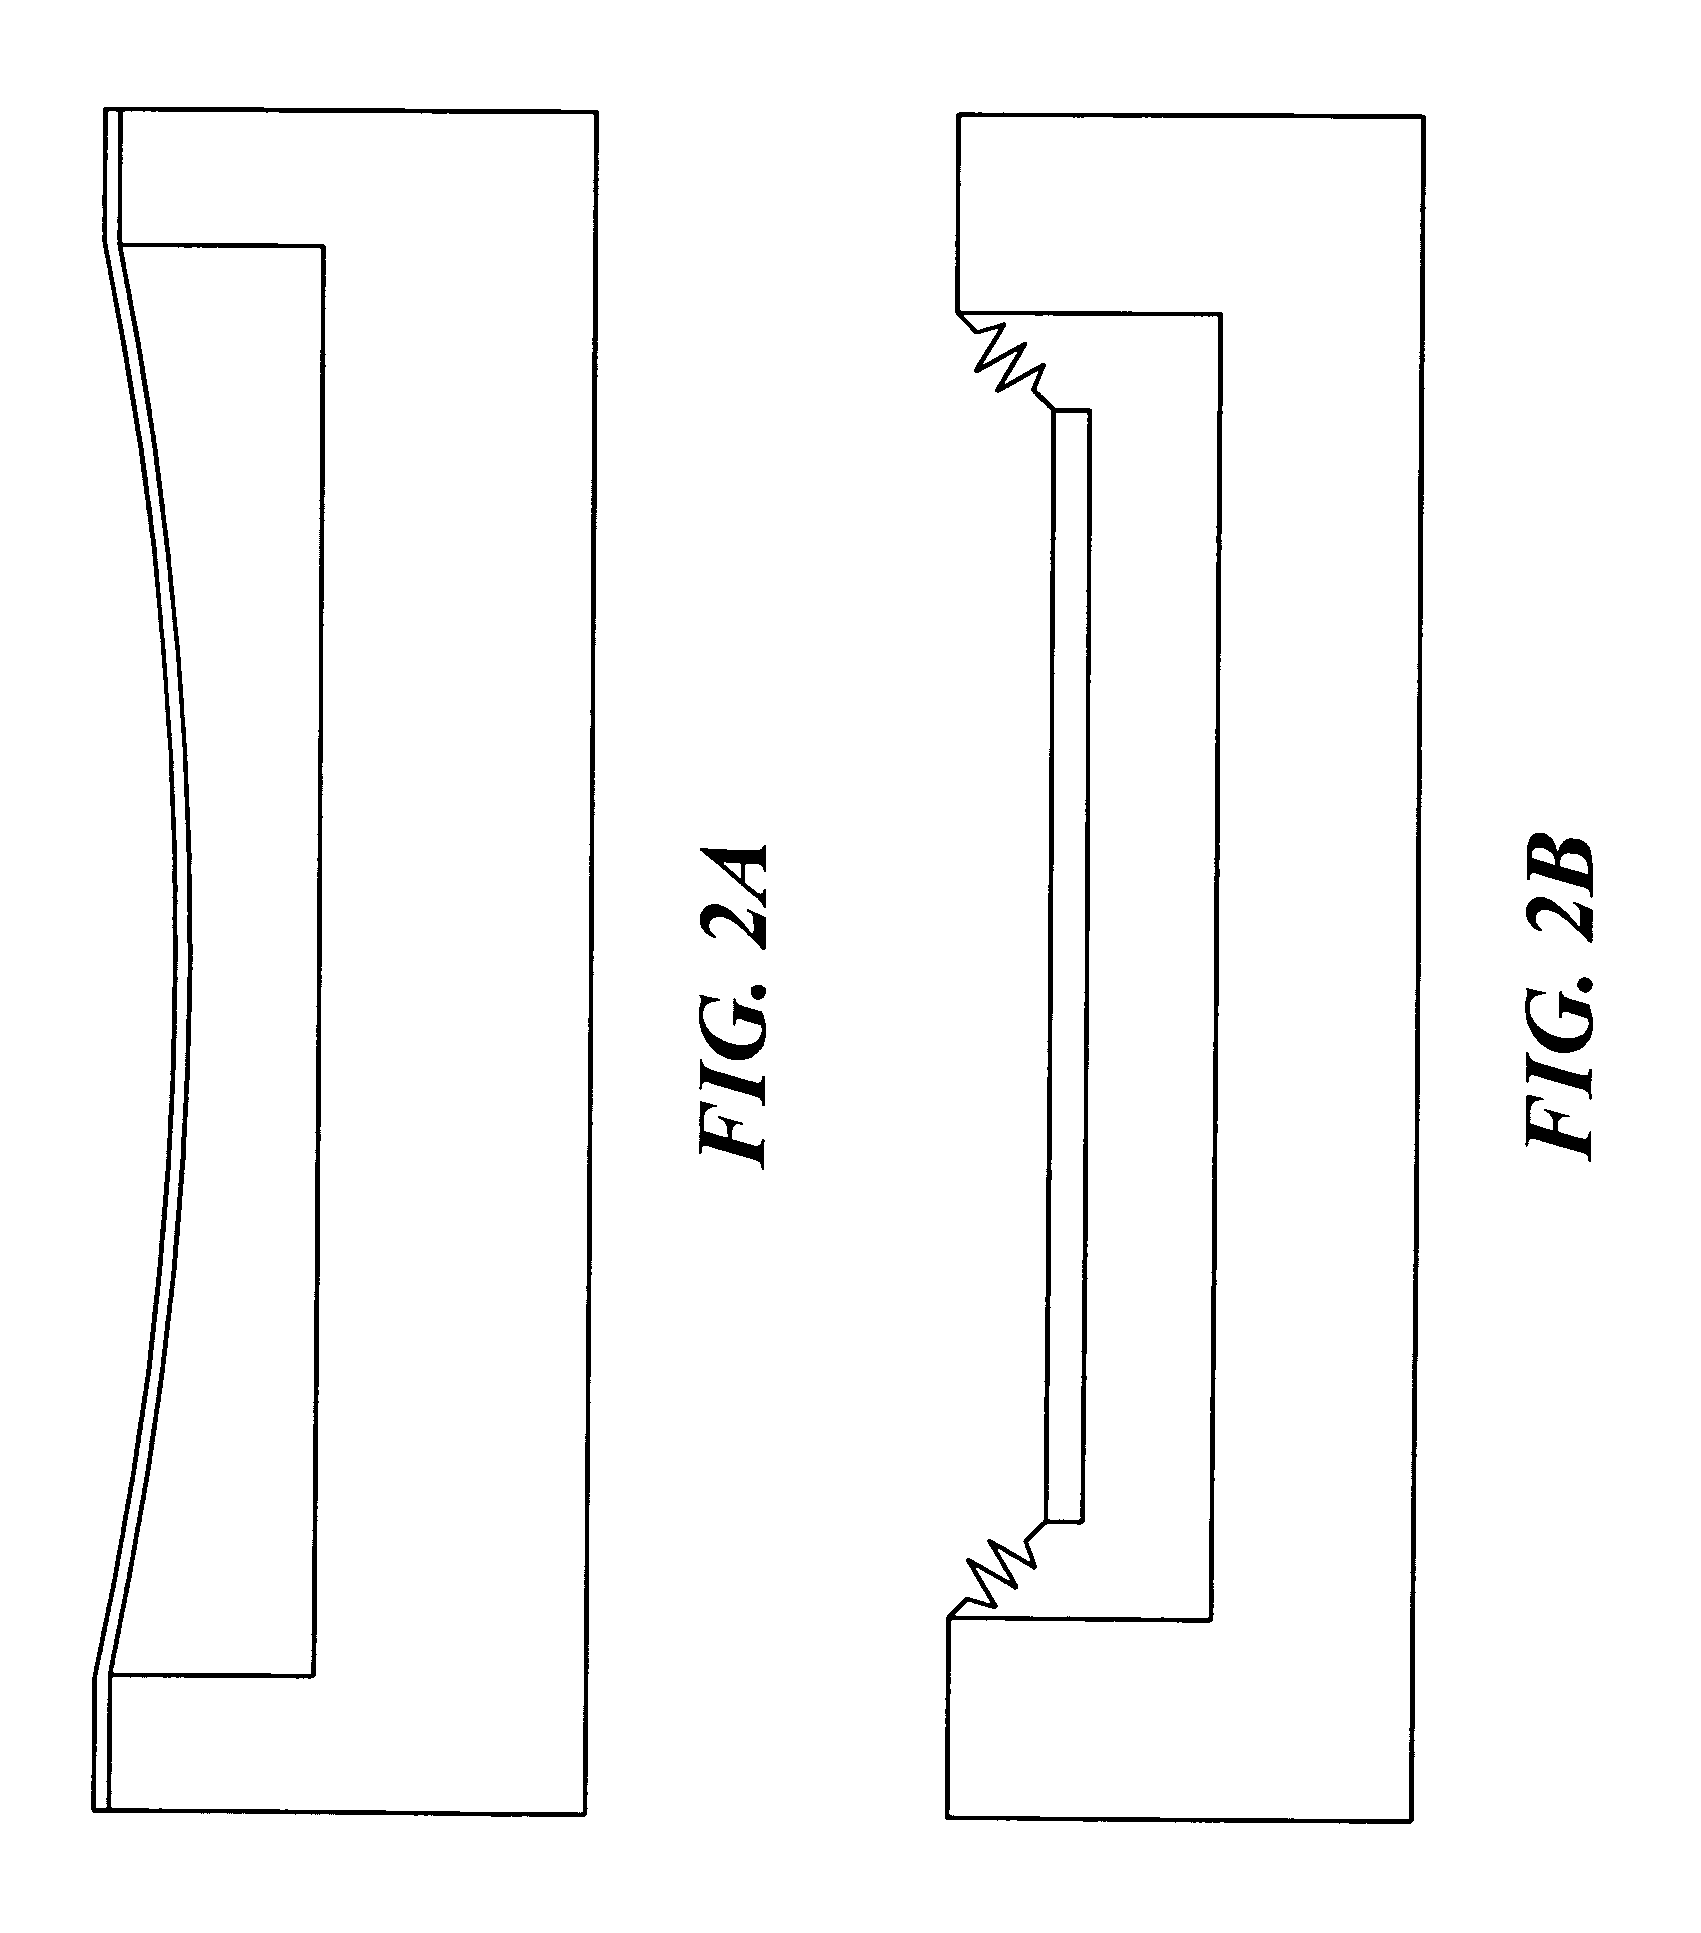 Support Apparatus for Microphone Diaphragm